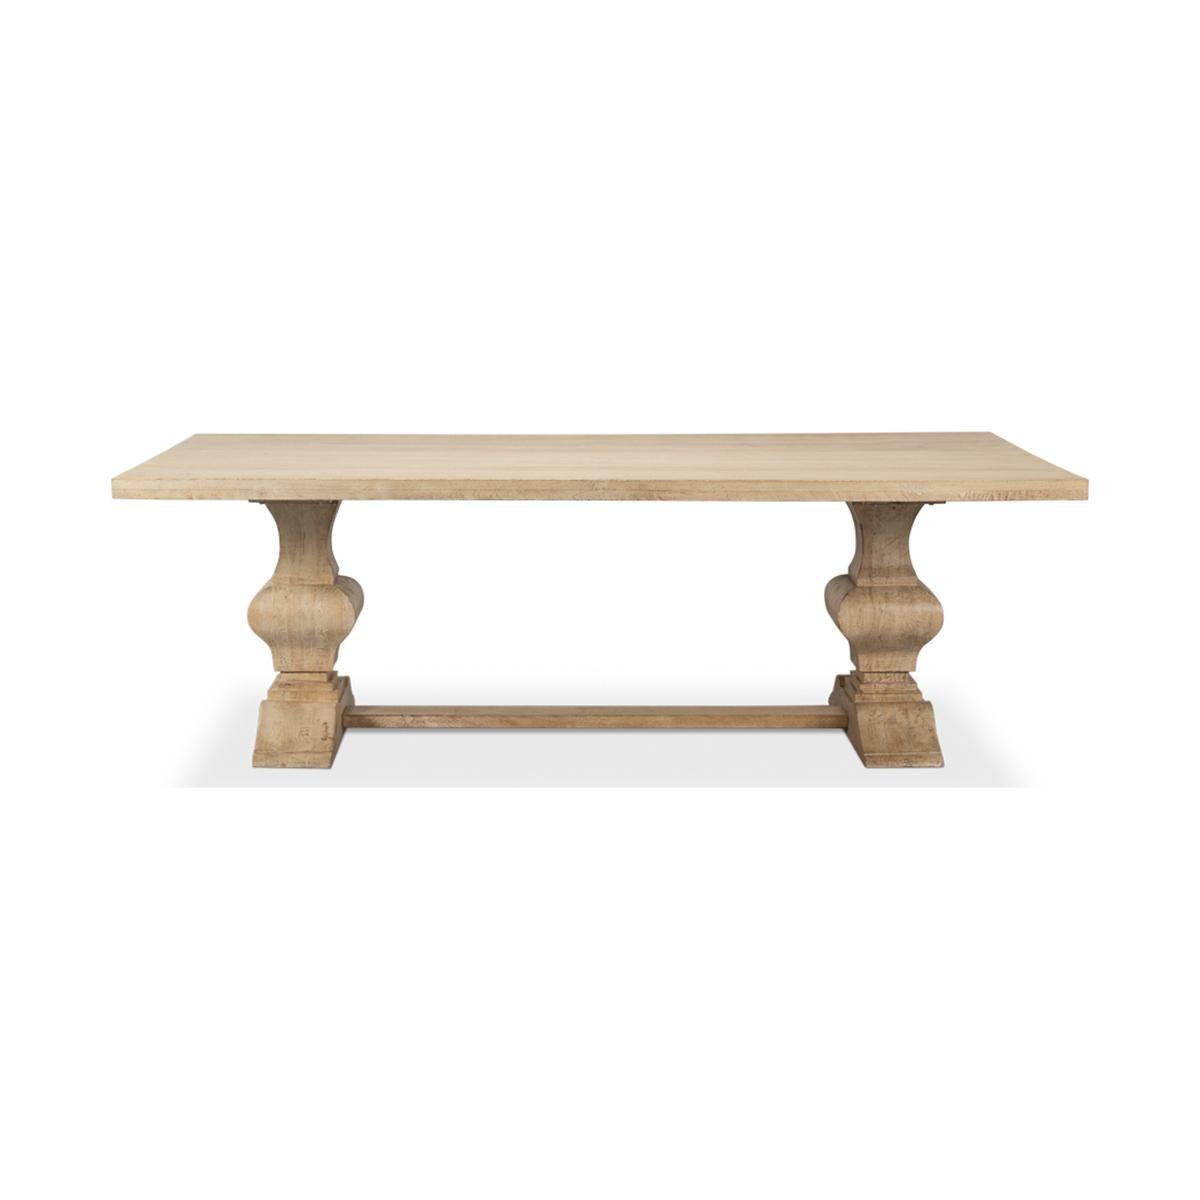 Coastal style refectory dining table, rich mango wood in a natural coastal style sienna finish, the rectangular old world style refectory dining table is raised on bold trestle and columns with a stretcher base.

Dimensions: 94